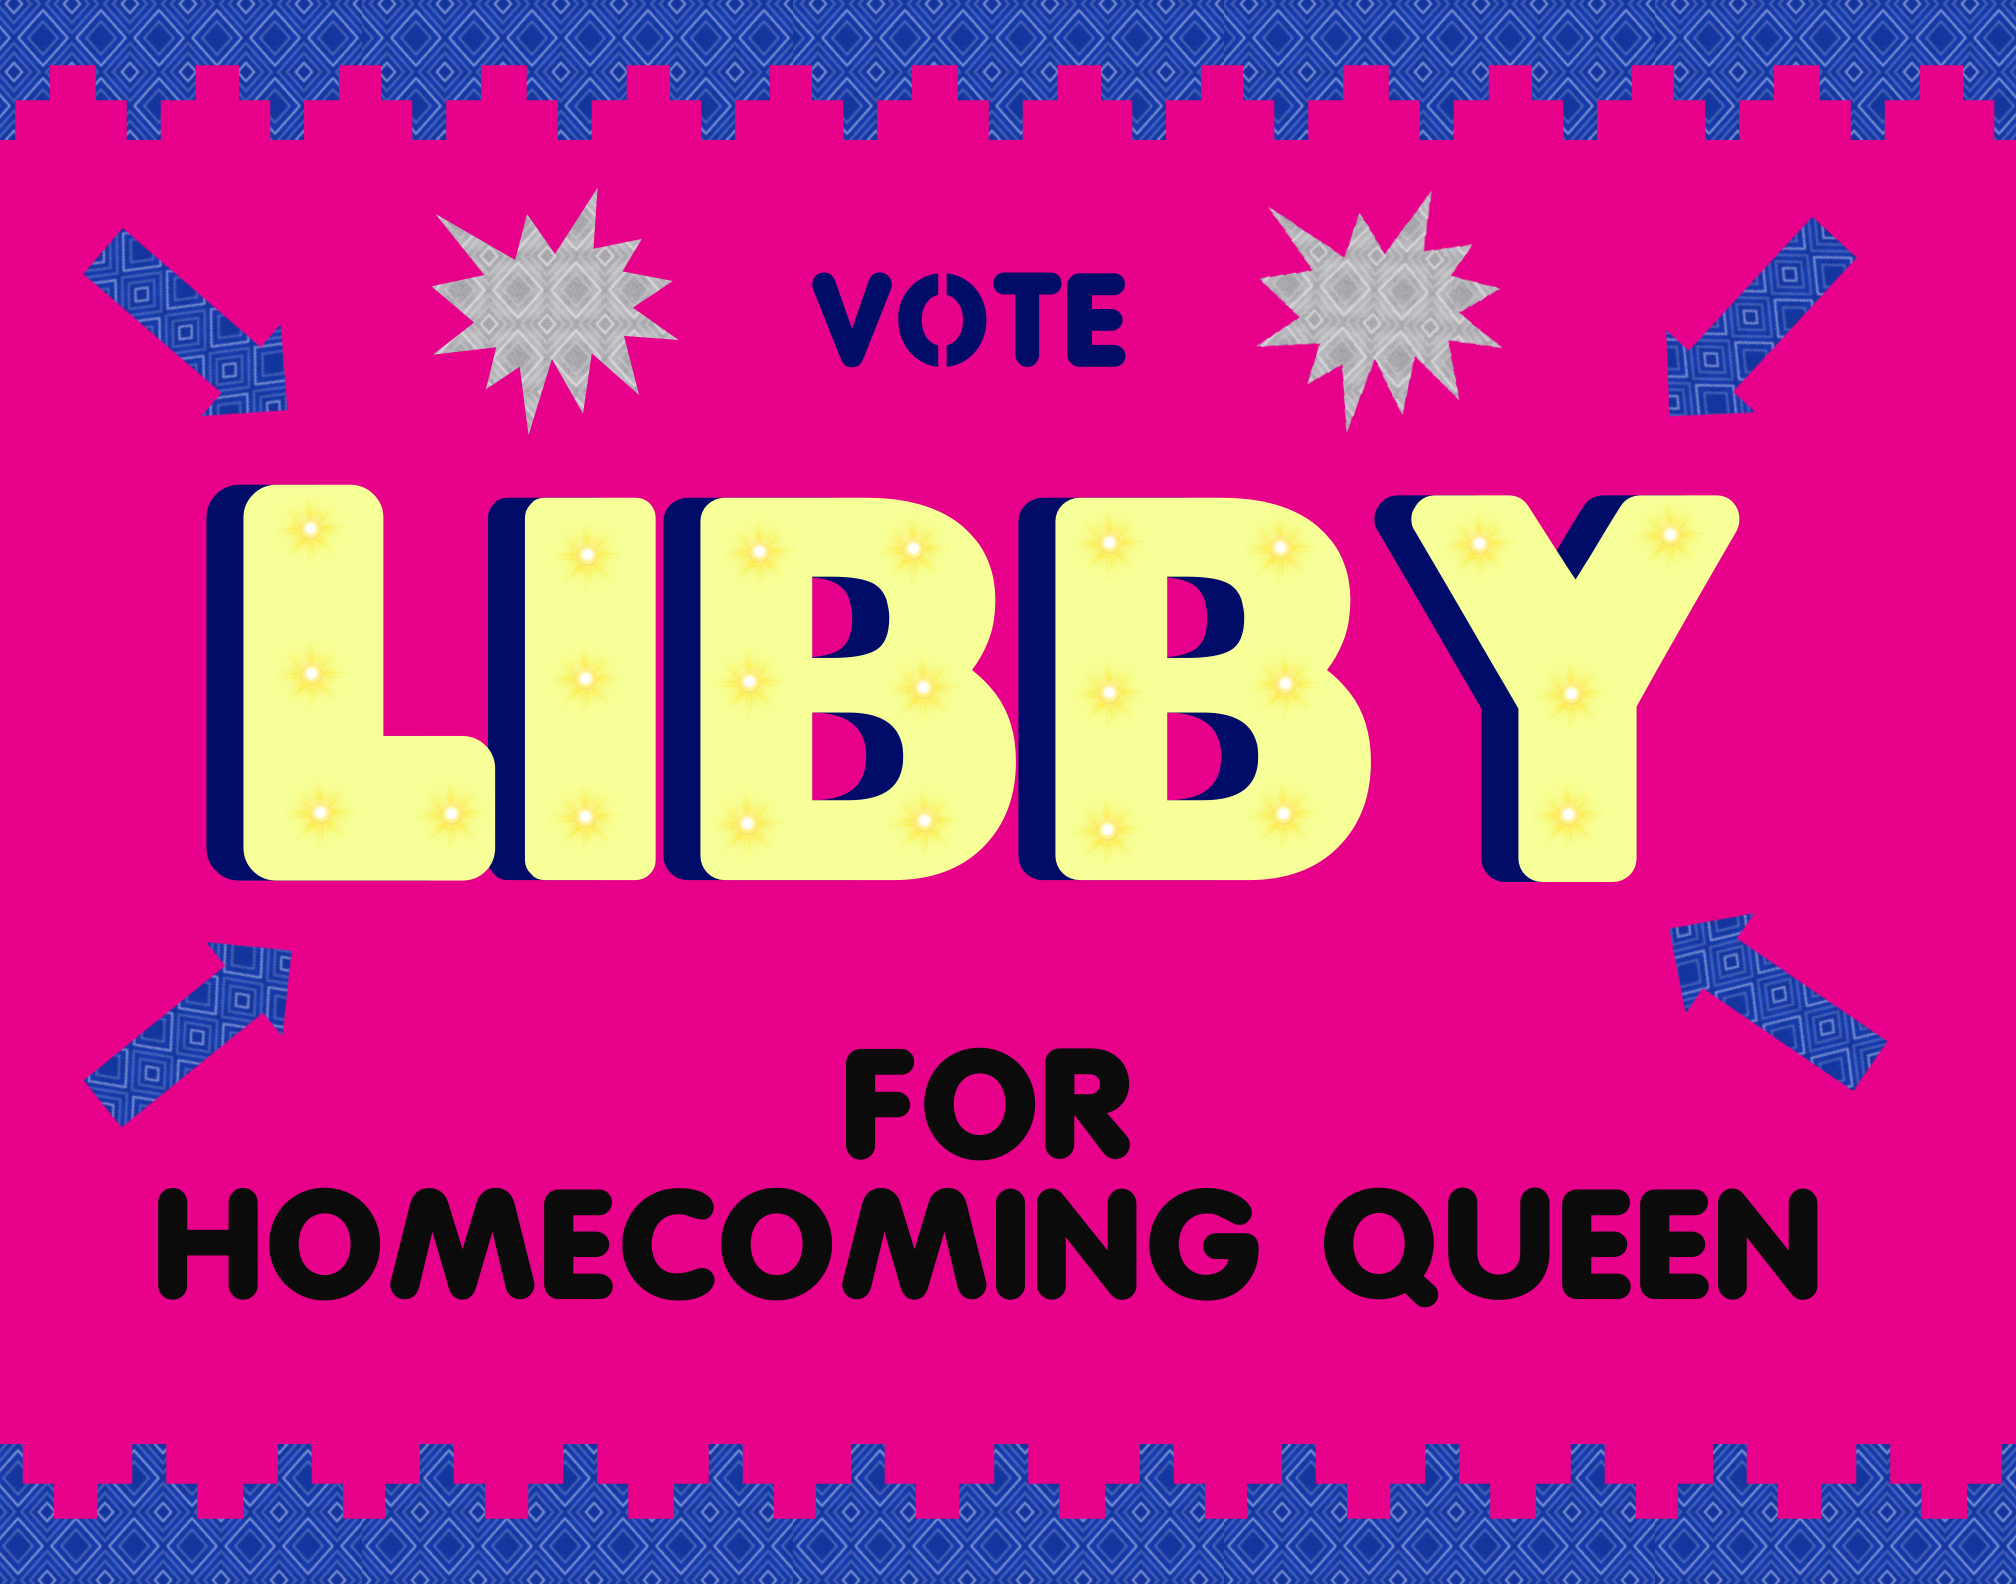 10 Nice Campaign Ideas For Homecoming Queen 2021